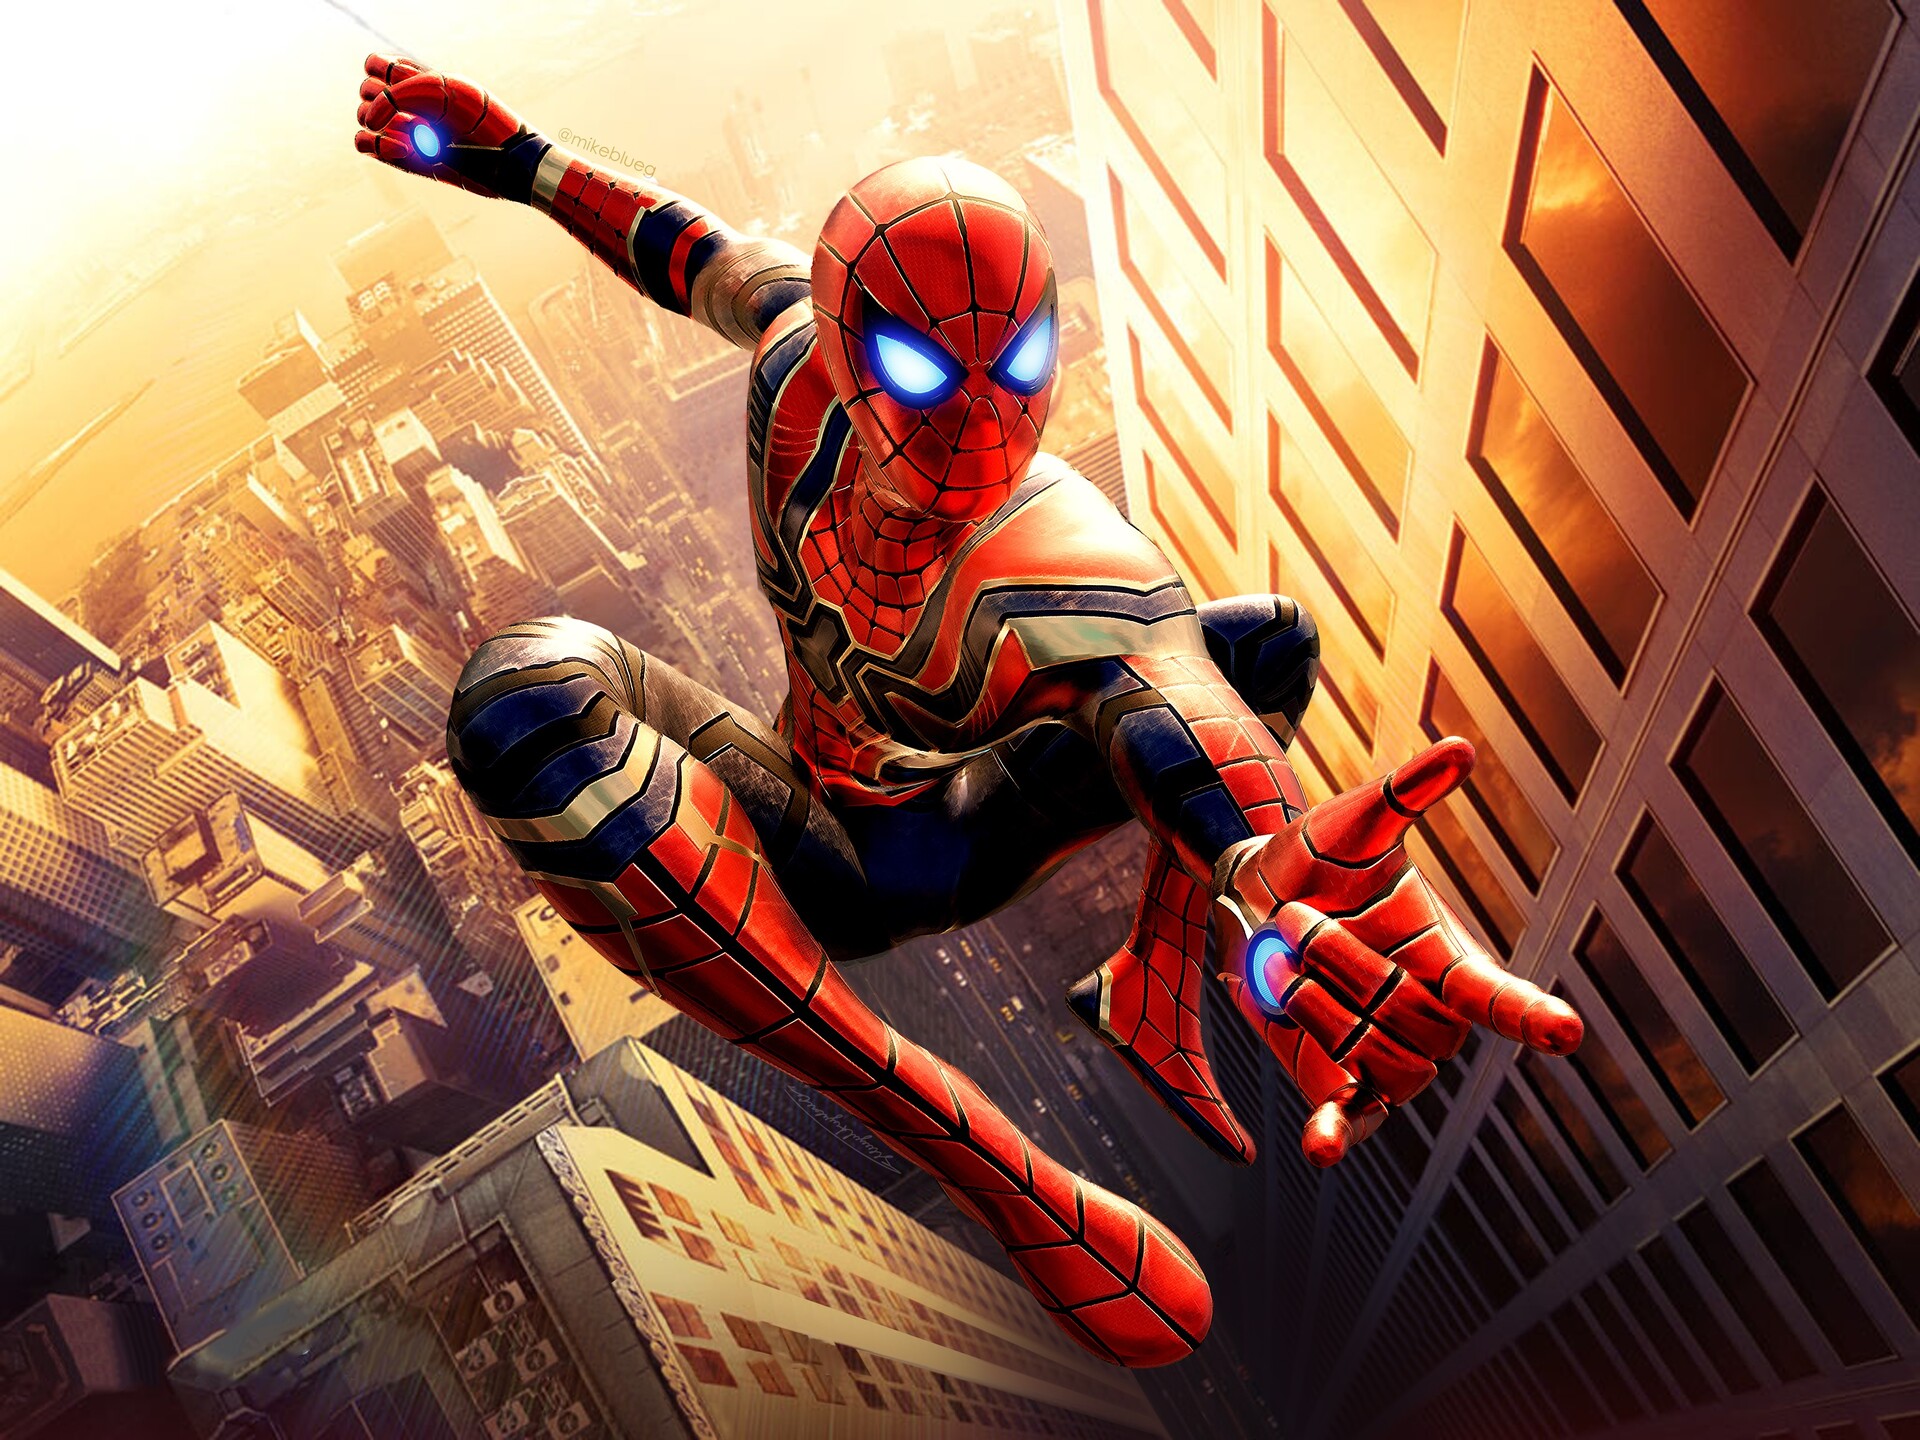 2048x2048 Resolution Spider Man Black and Red Suit Comic Ipad Air Wallpaper  - Wallpapers Den